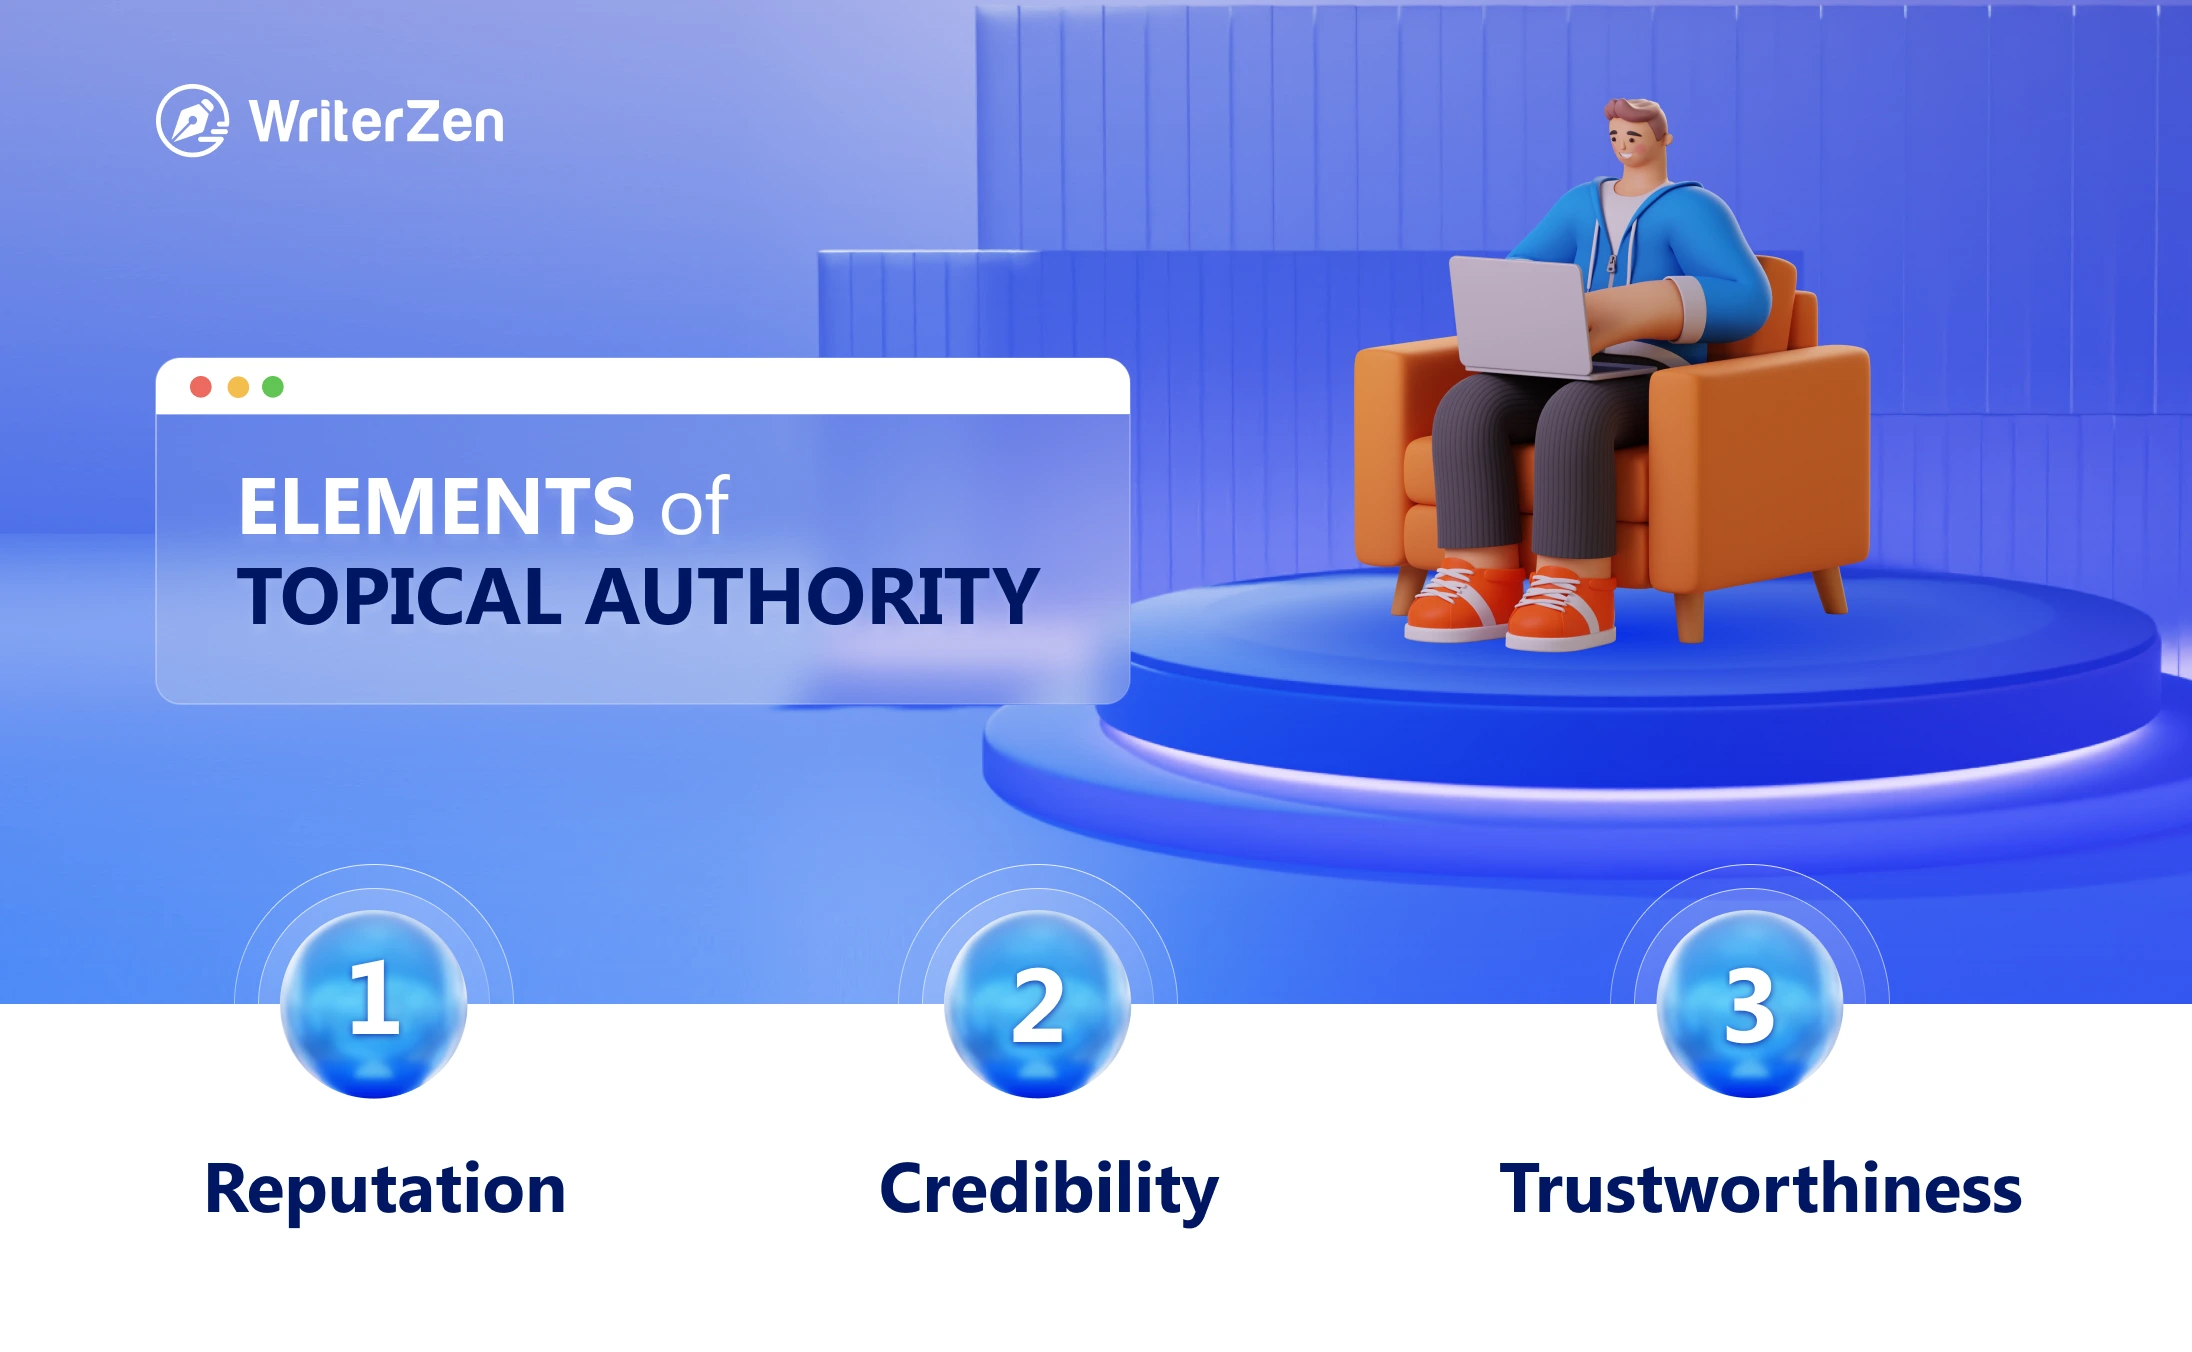 Elements of Topical Authority